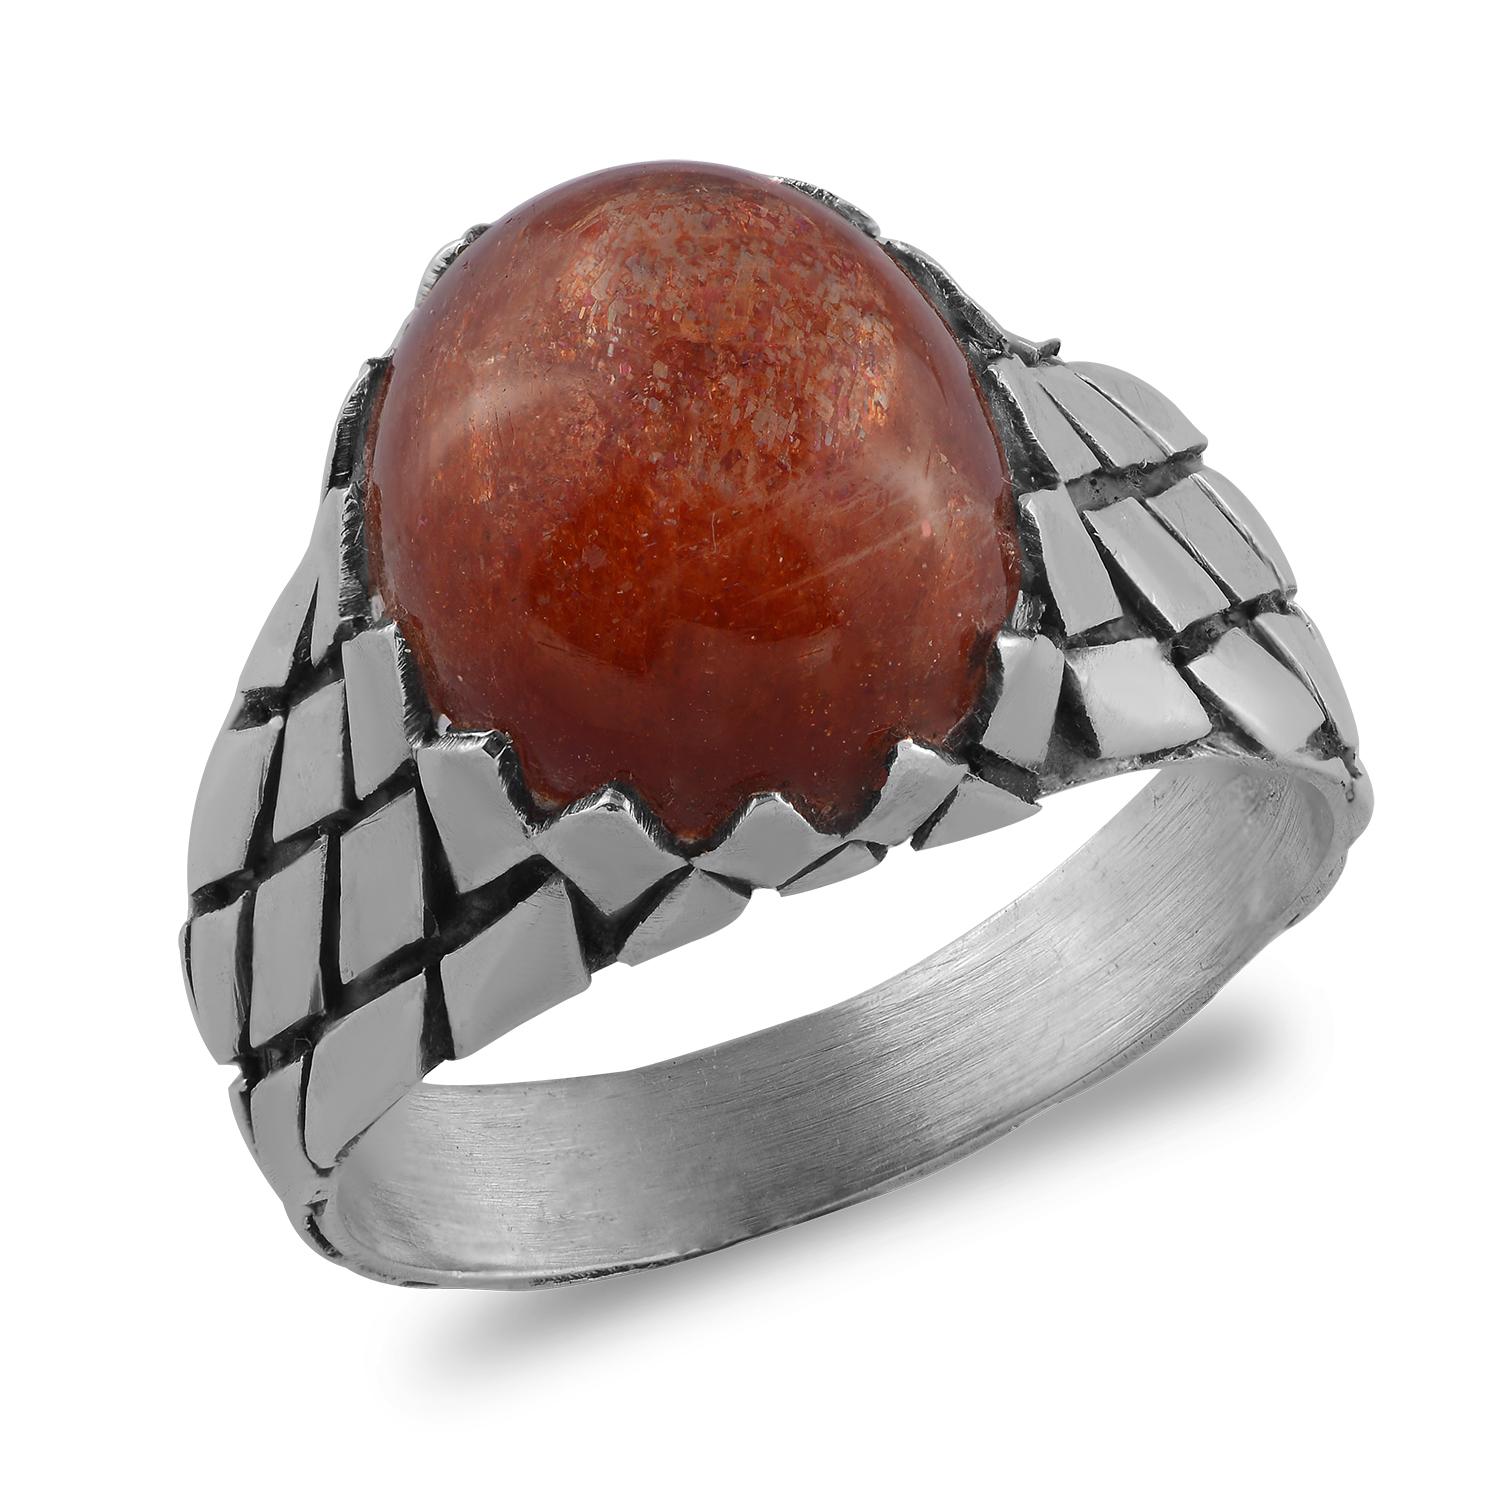 

In this striking one of a kind  Sunstone Man's Silver Ring, we have used a magical gemstone called sunstone, which glimmers and creates iridescence  when viewed from different angles. It has a been set in oxidized silver with patterning on it. The